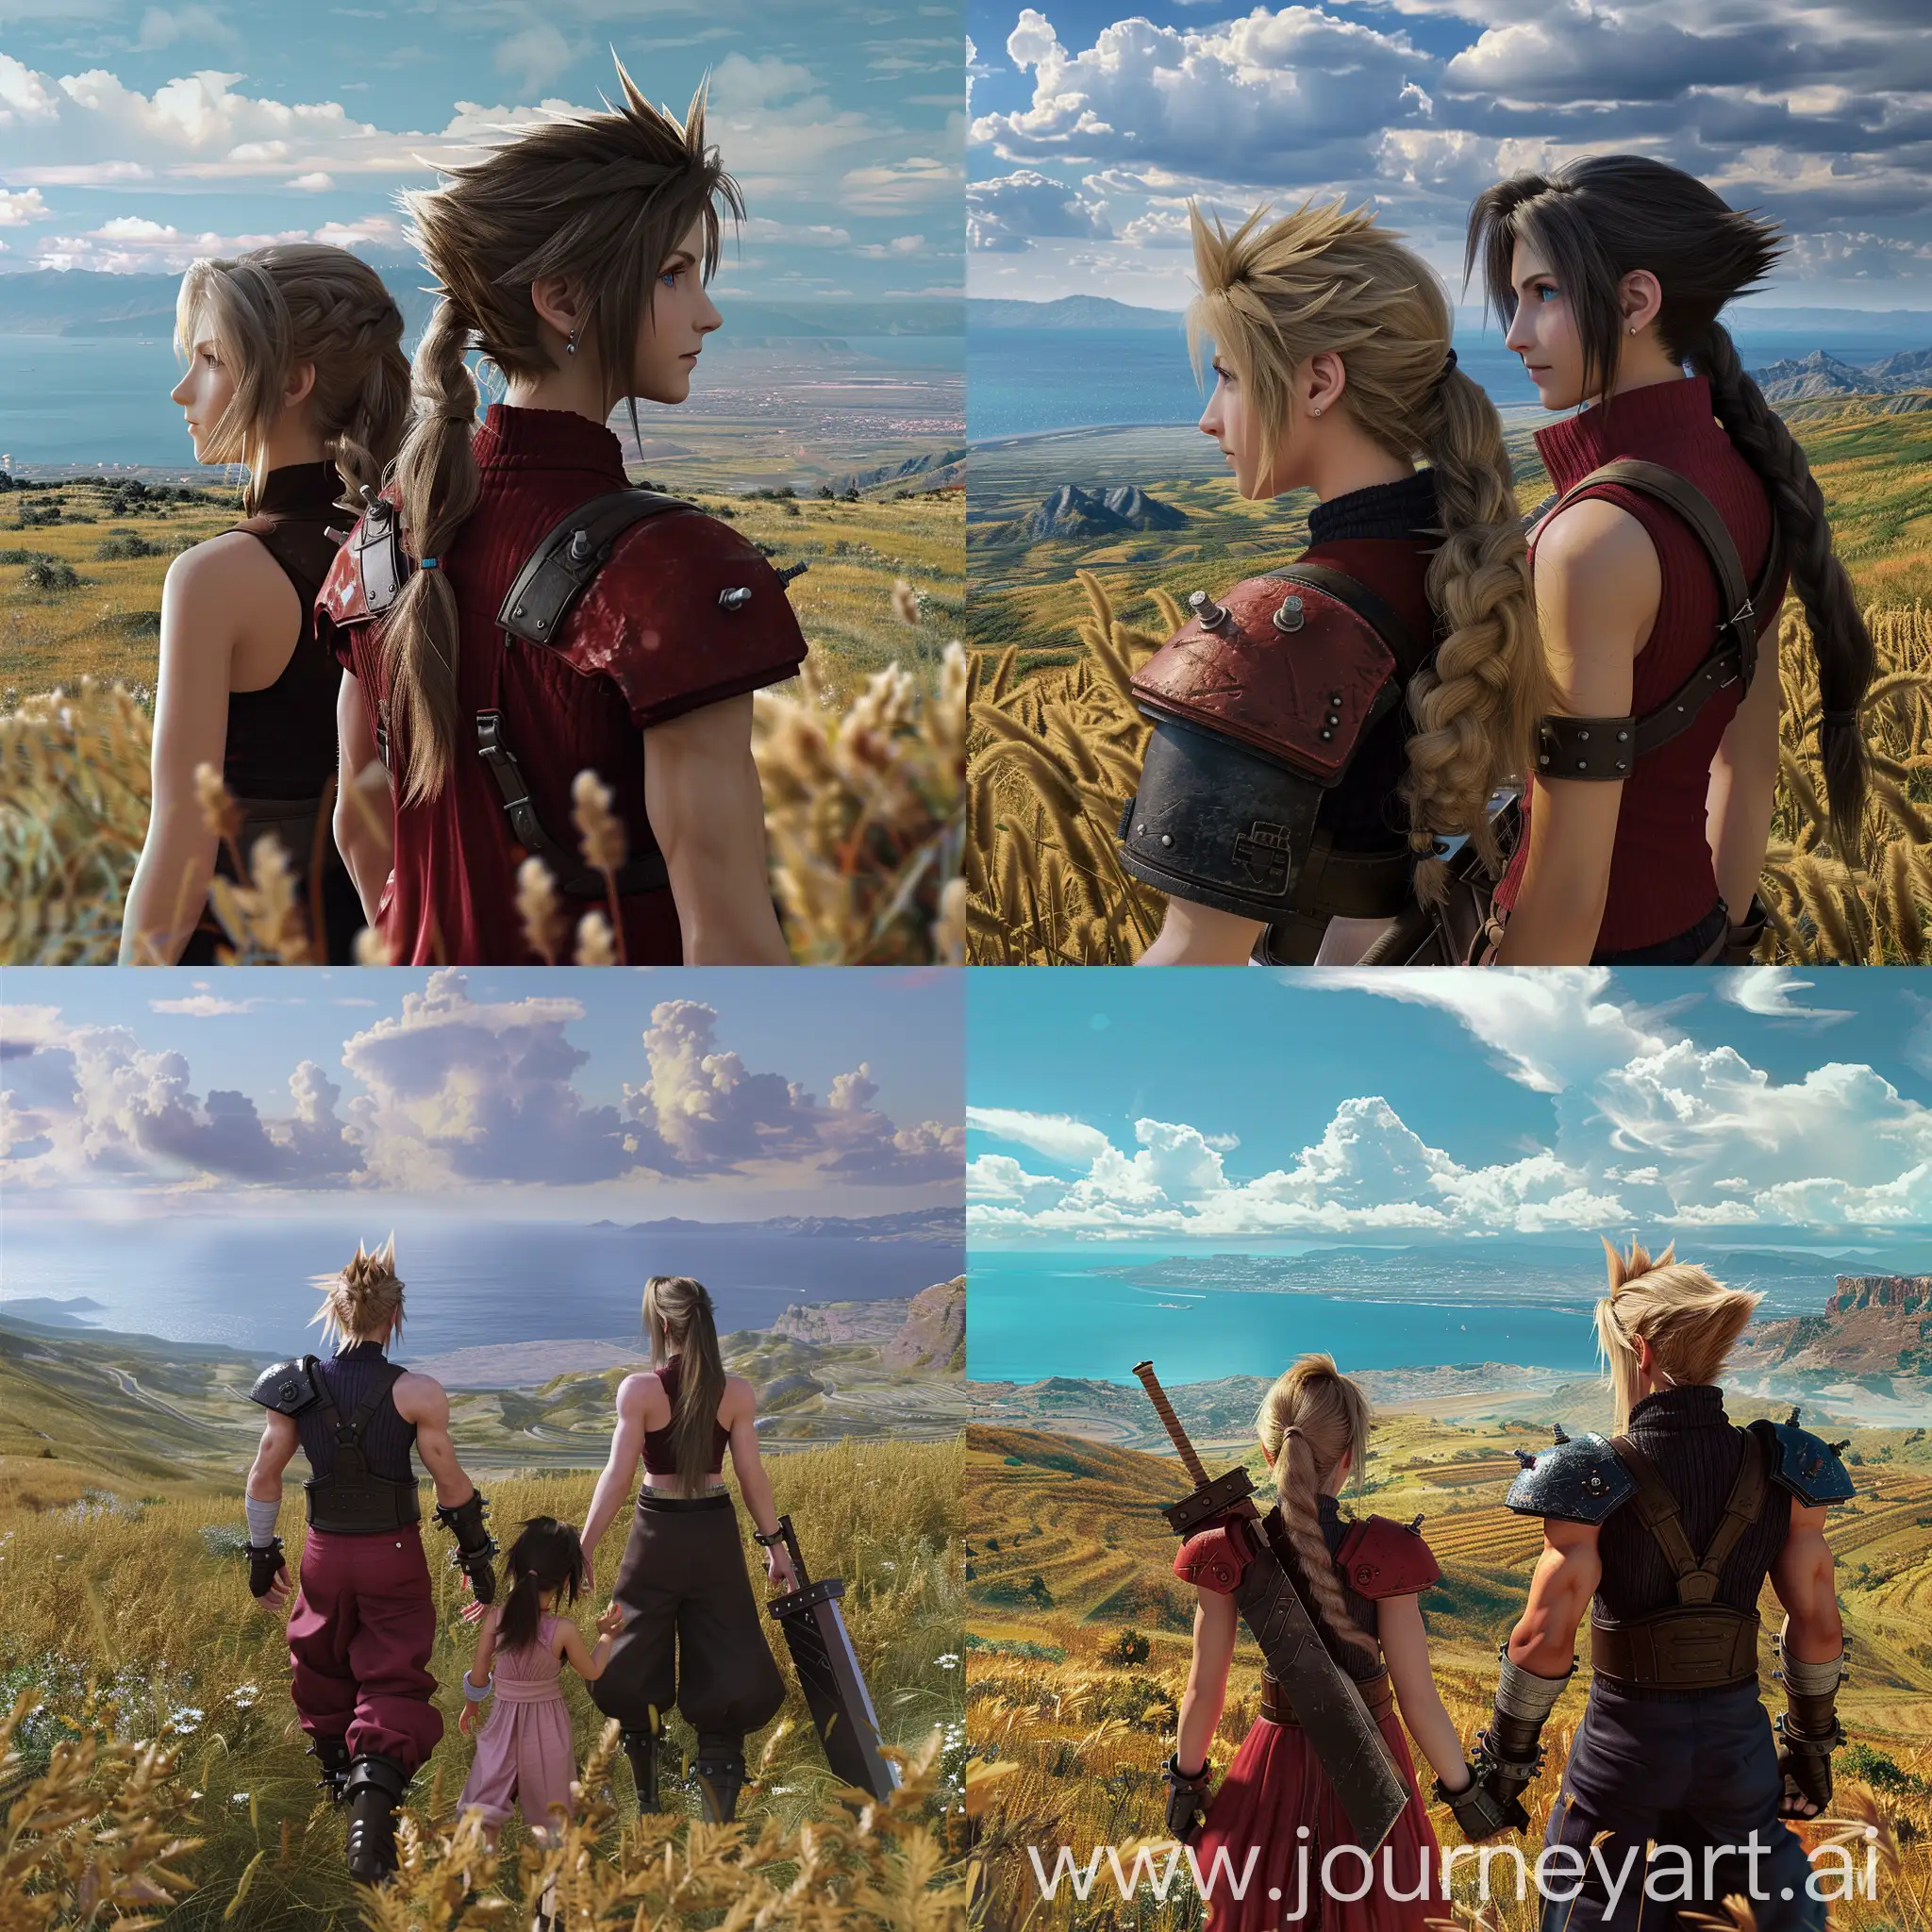 Epic-Journey-Tifa-Cloud-and-Aerith-in-Hyperrealistic-Fantasy-World